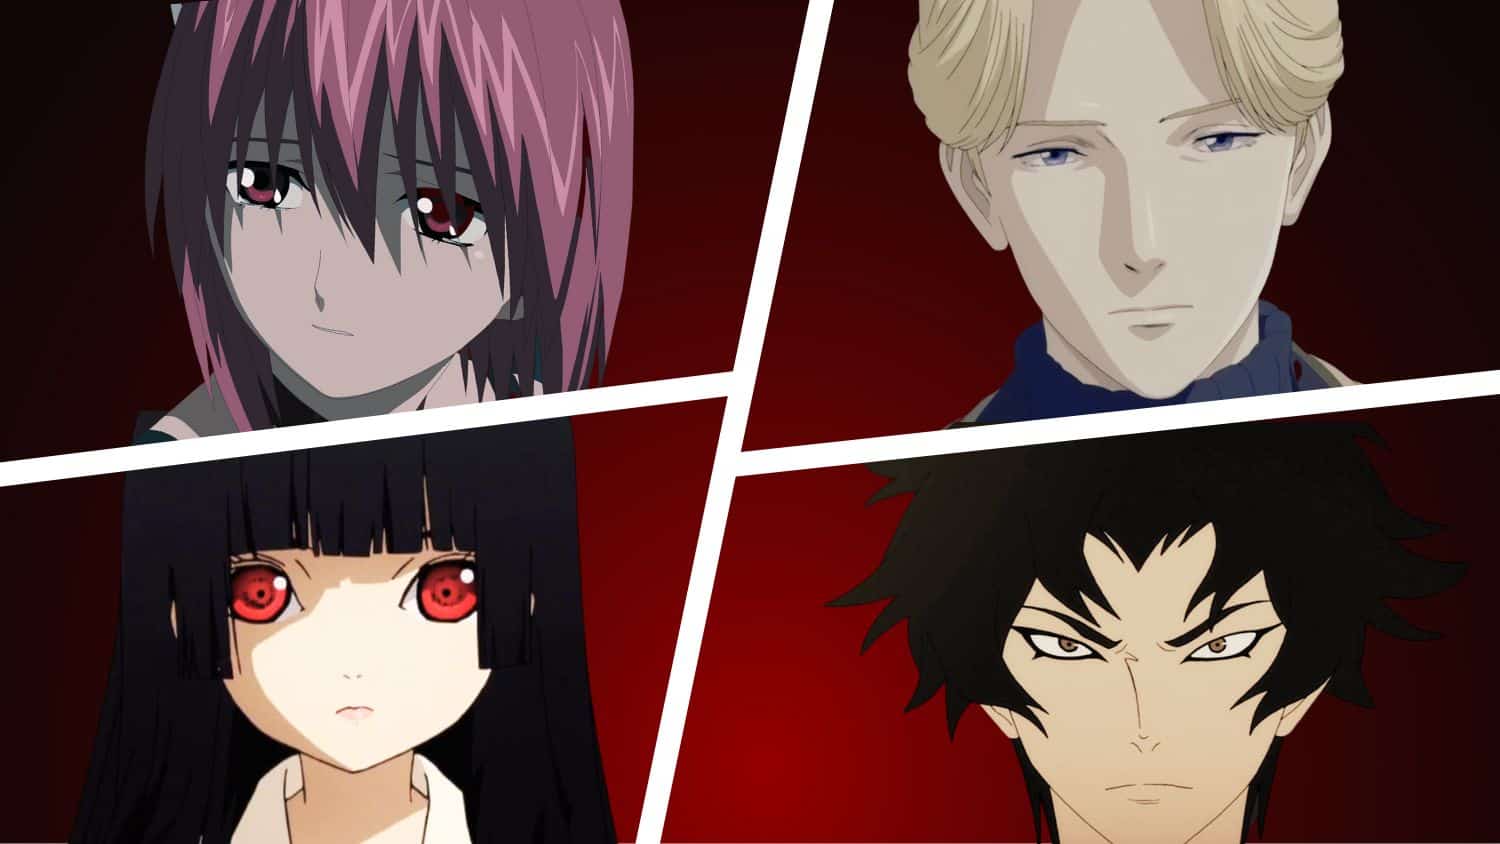 collage of characters from dark anime